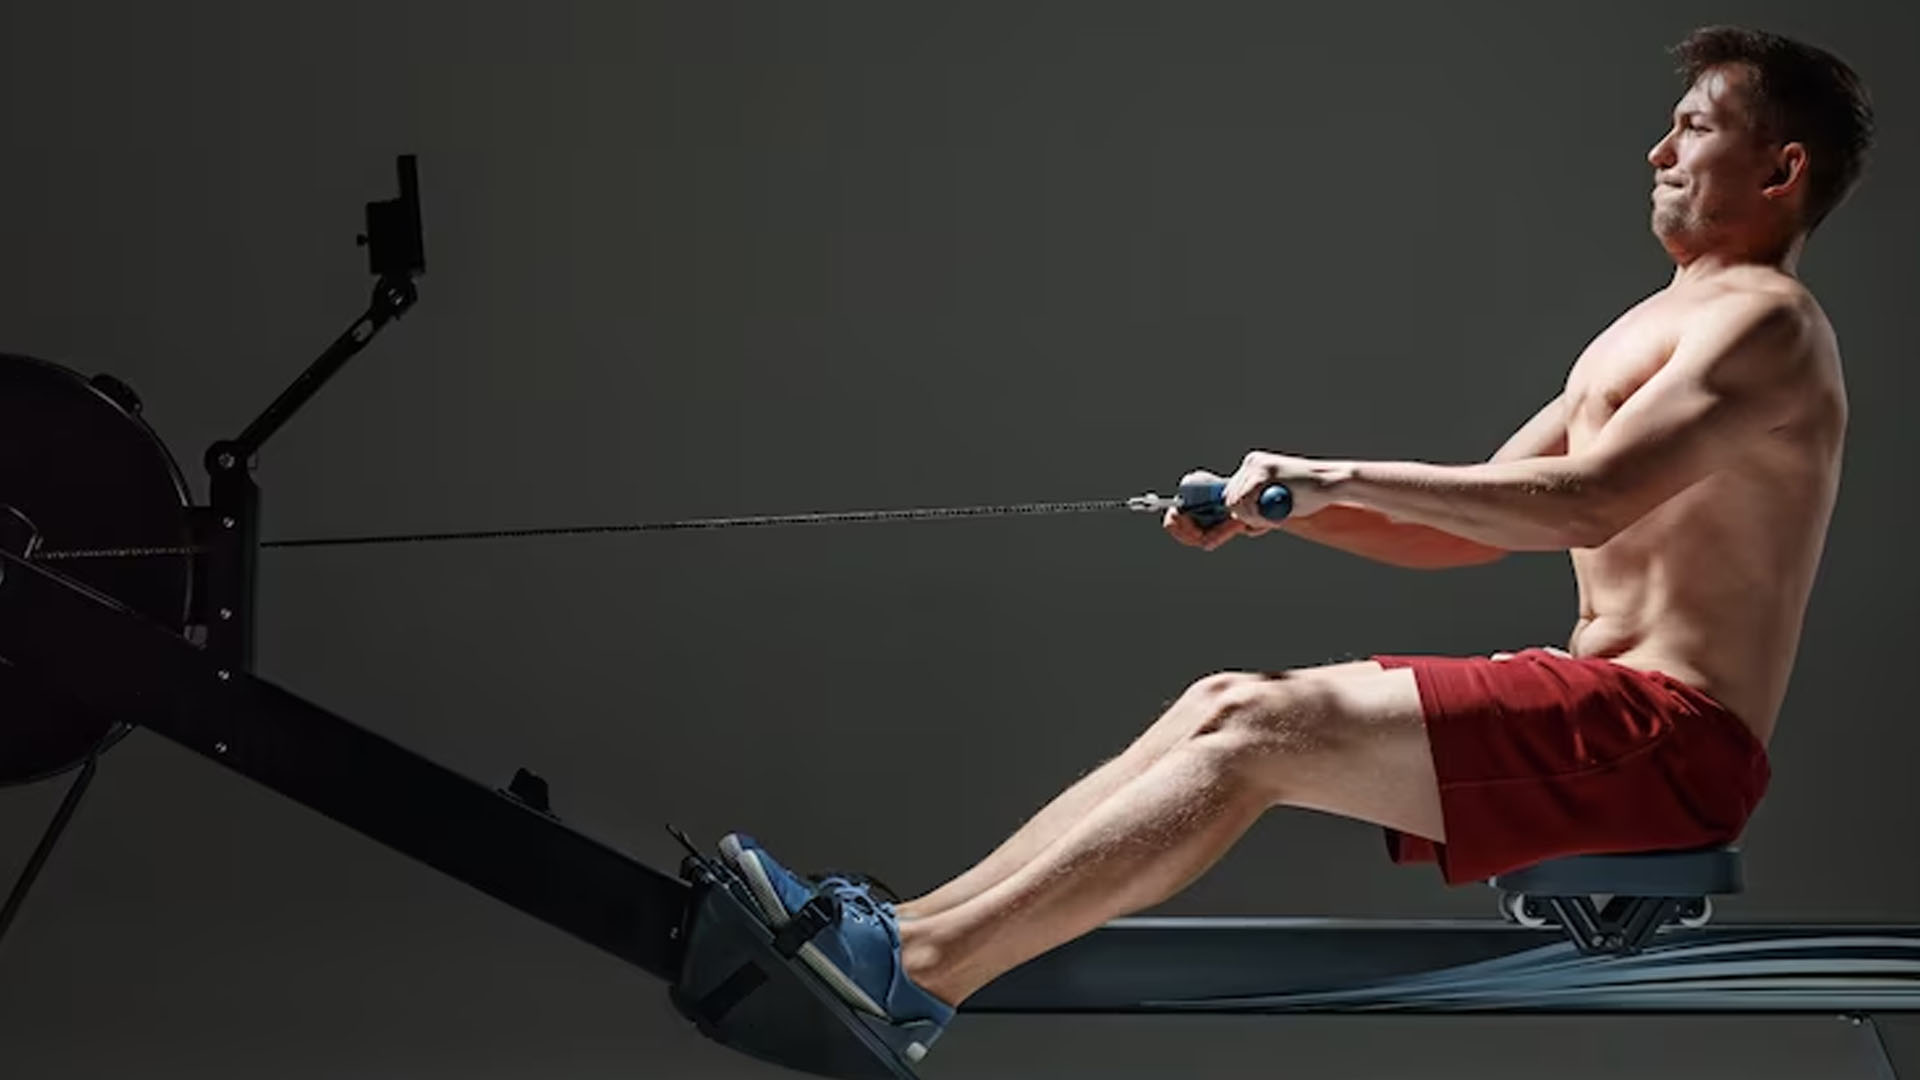 What Are The Health Benefits of Rowing?